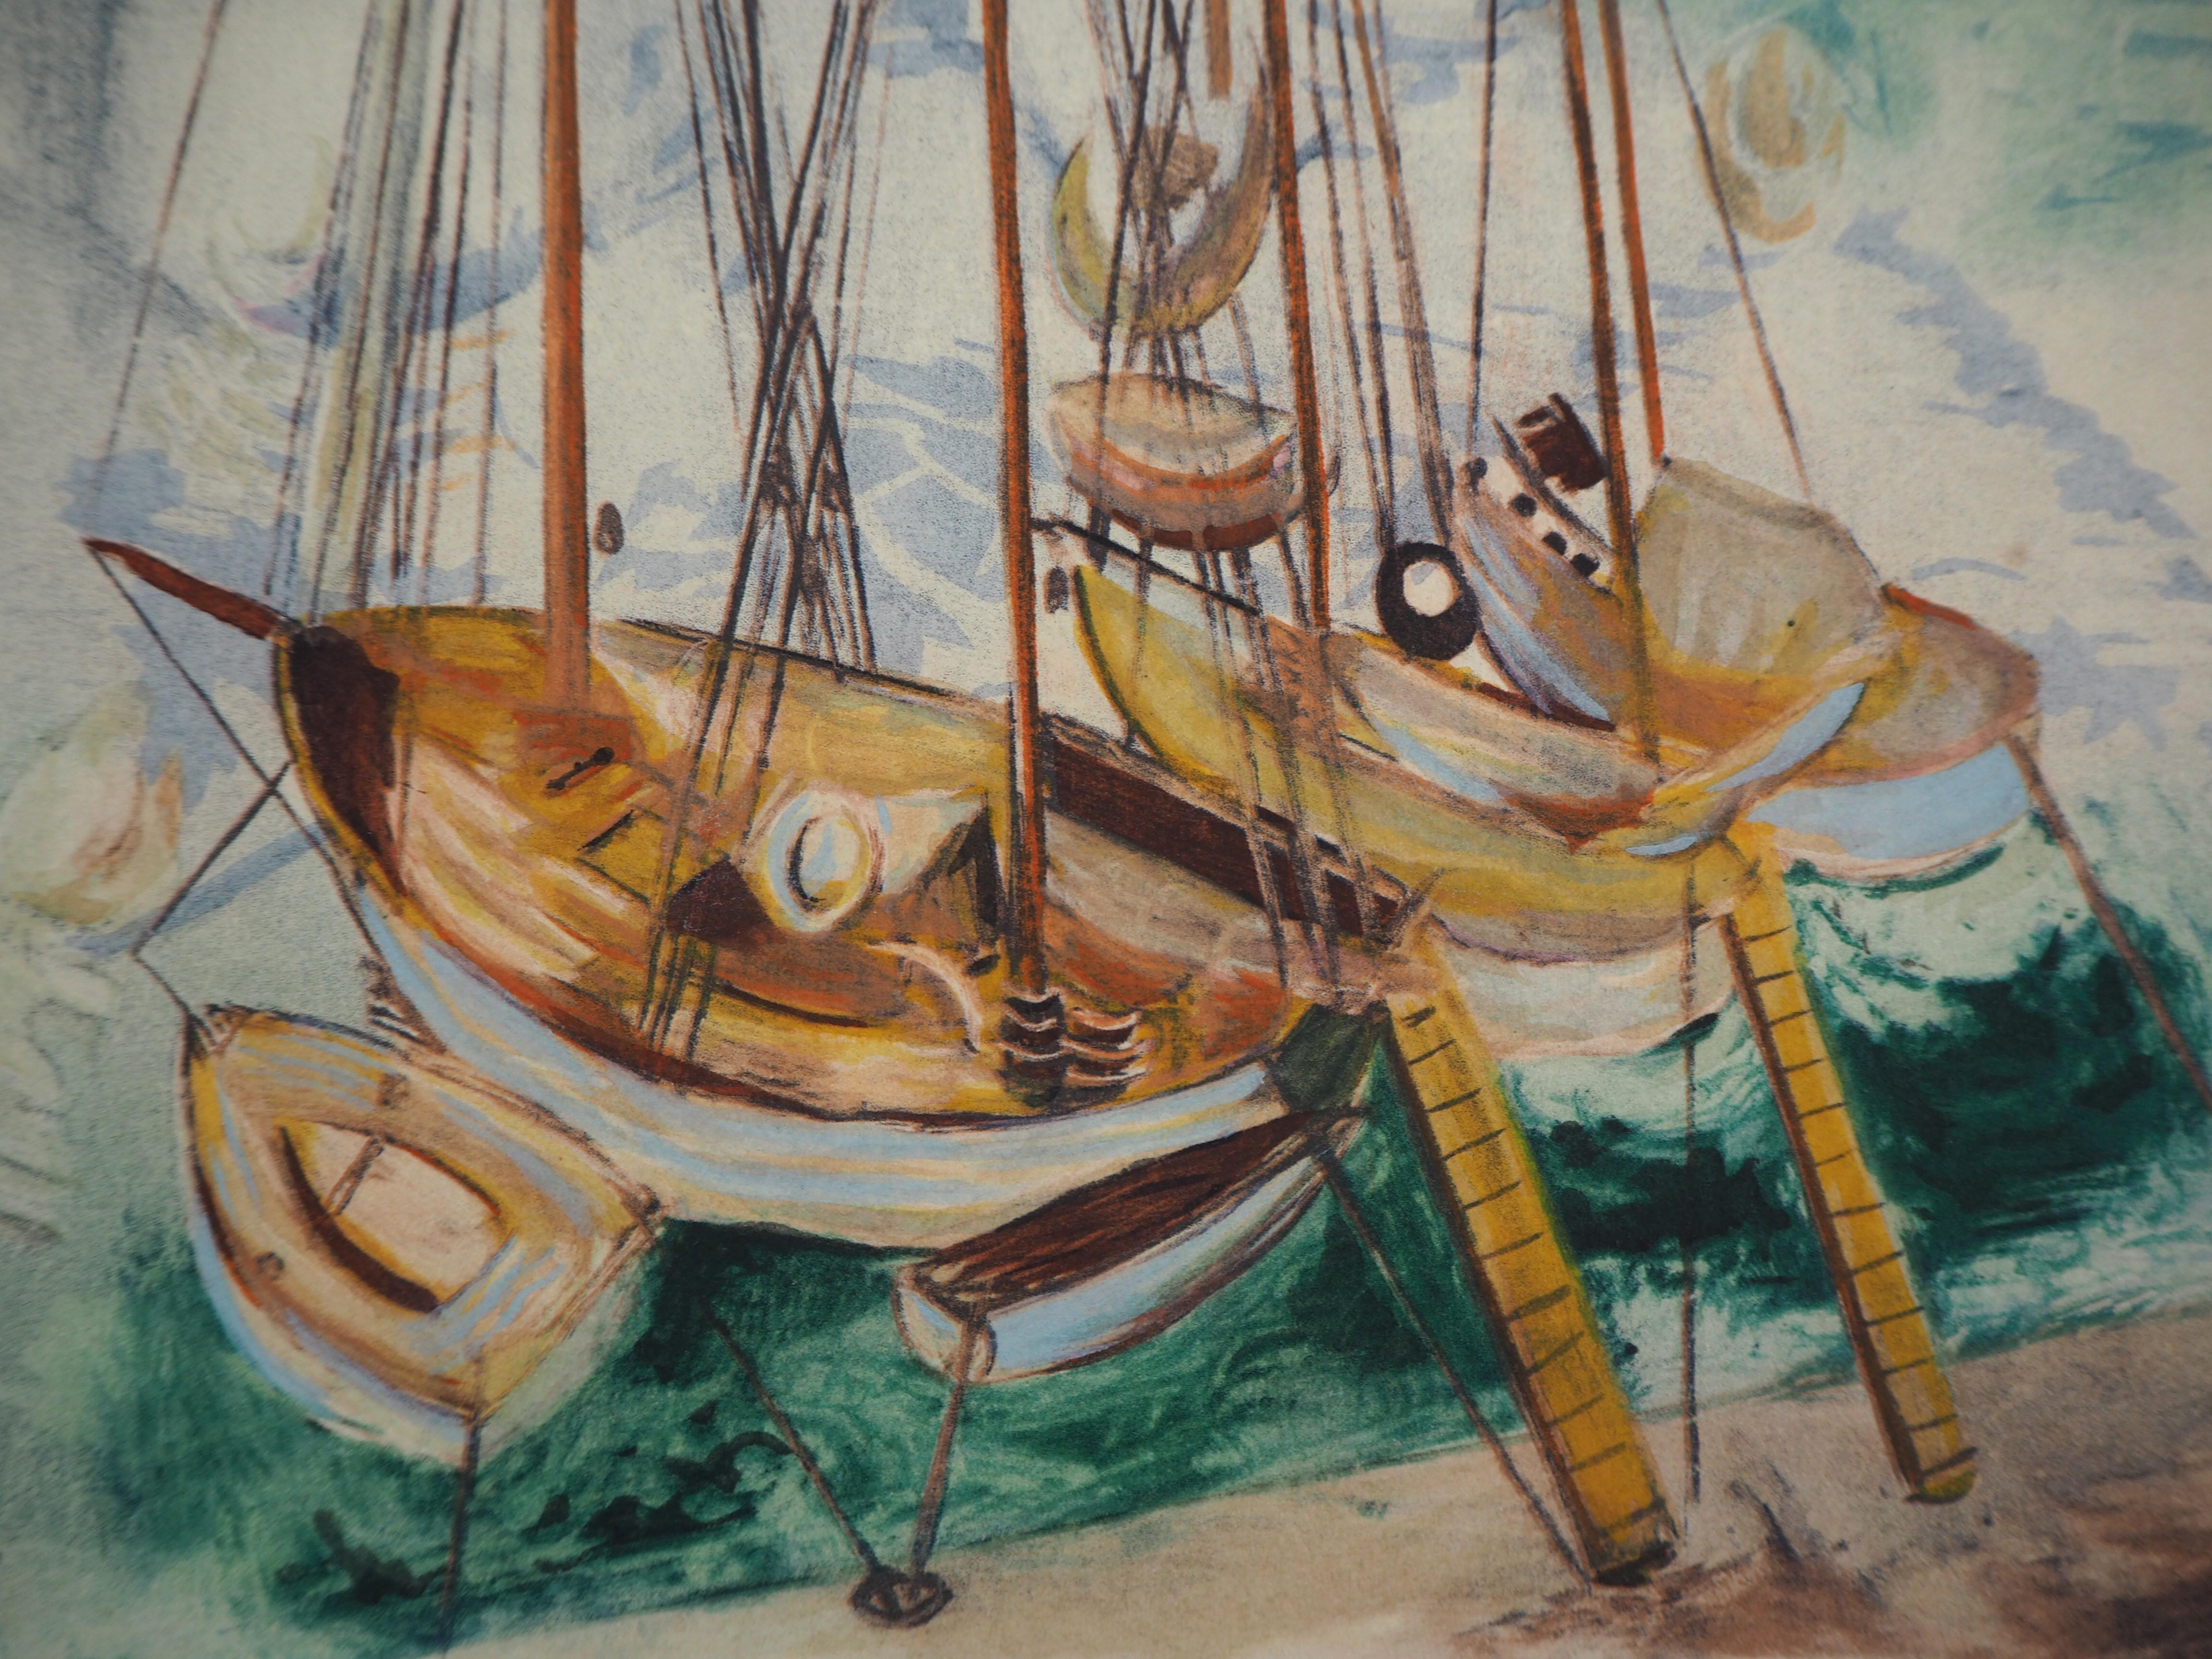 Sailing Boats in French Harbour - Original Lithograph - Brown Landscape Print by Moise Kisling